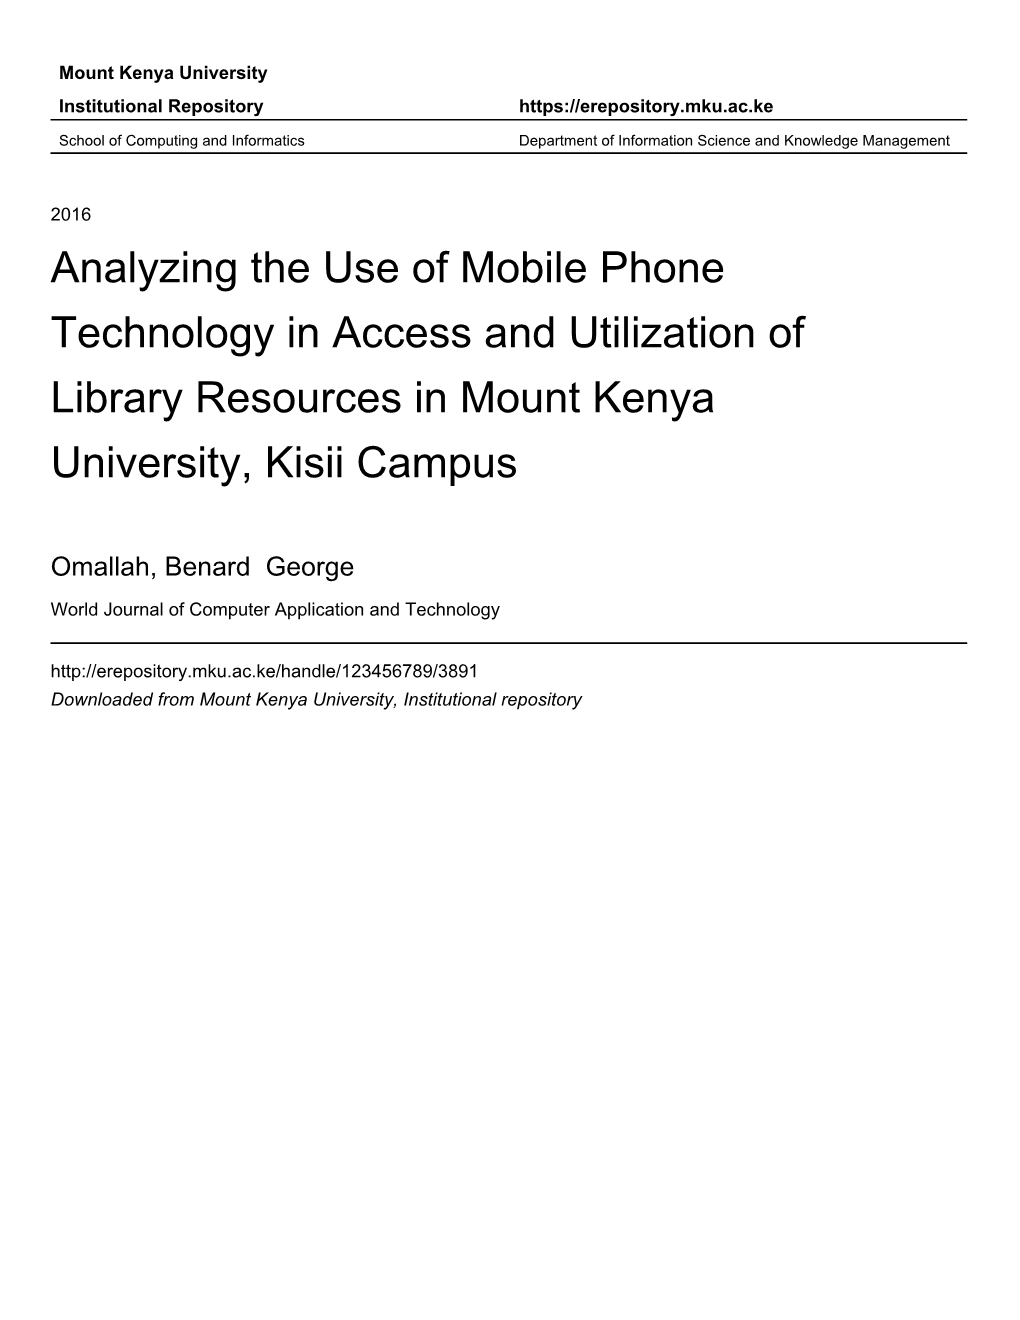 Analyzing the Use of Mobile Phone Technology in Access and Utilization of Library Resources in Mount Kenya University, Kisii Campus